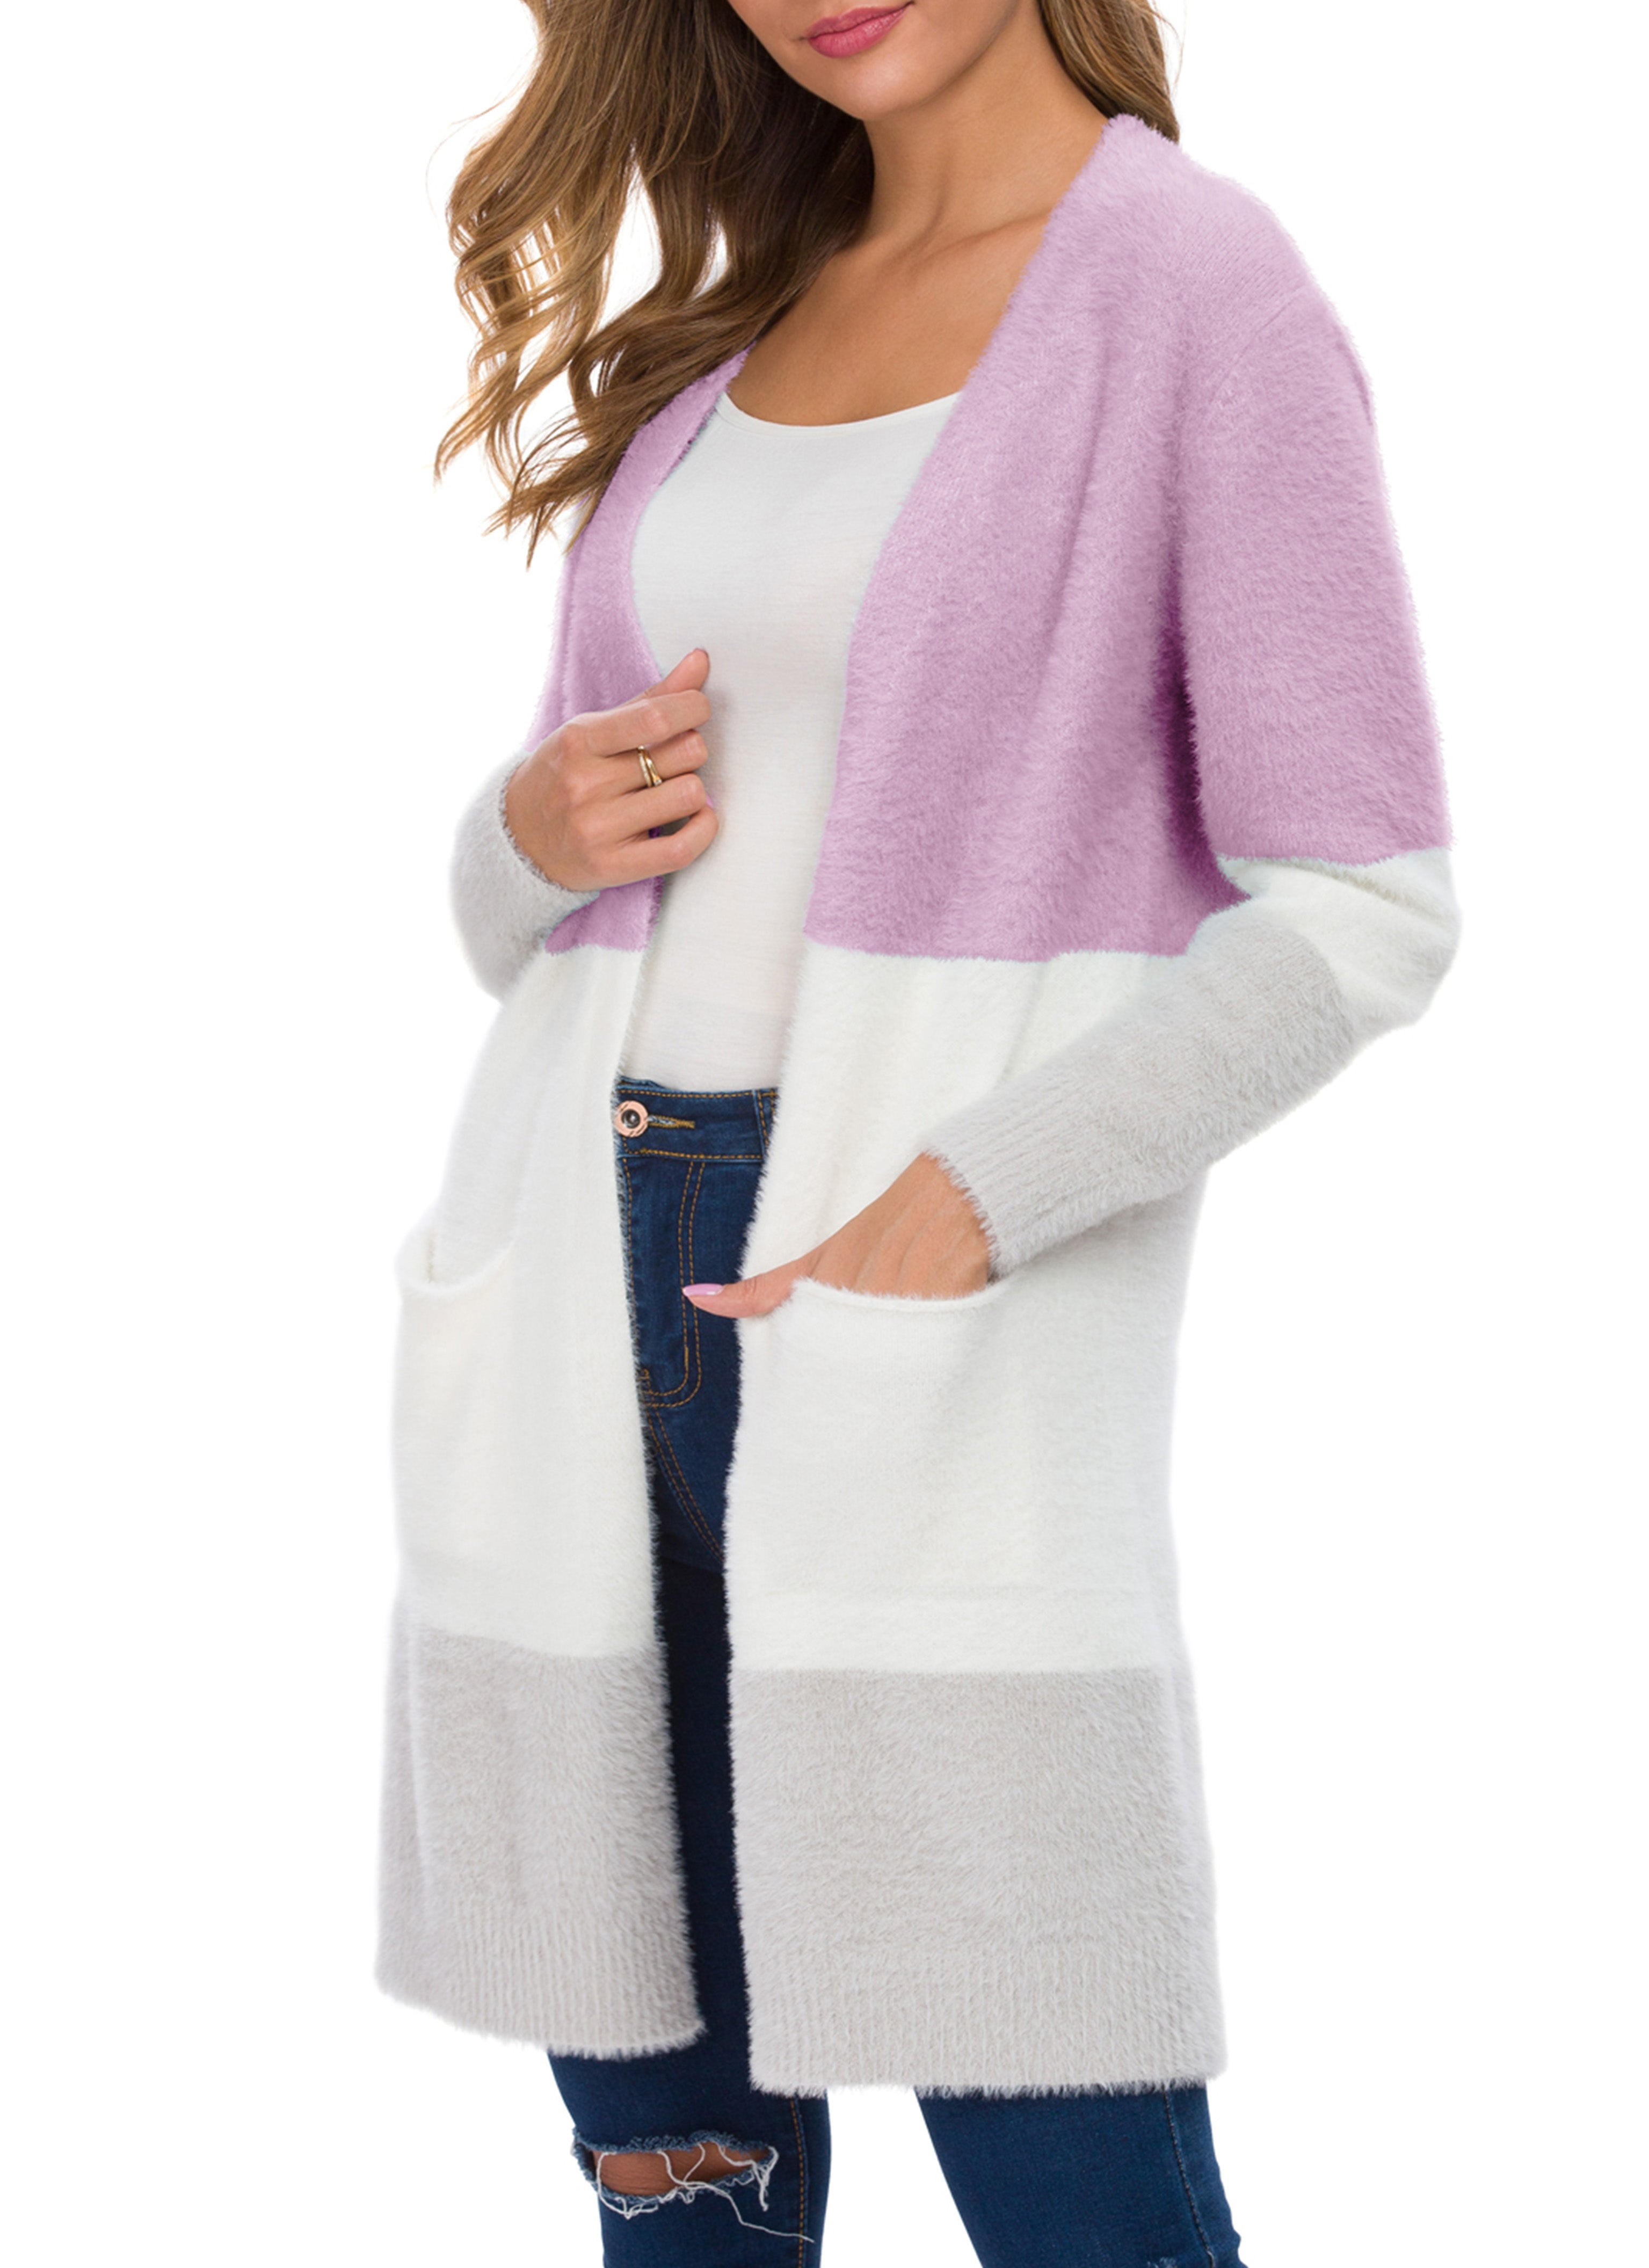 OLRIK Women's Casual Open Front Knit Cardigans Long Sleeve Plush Sweater Coat with Pockets